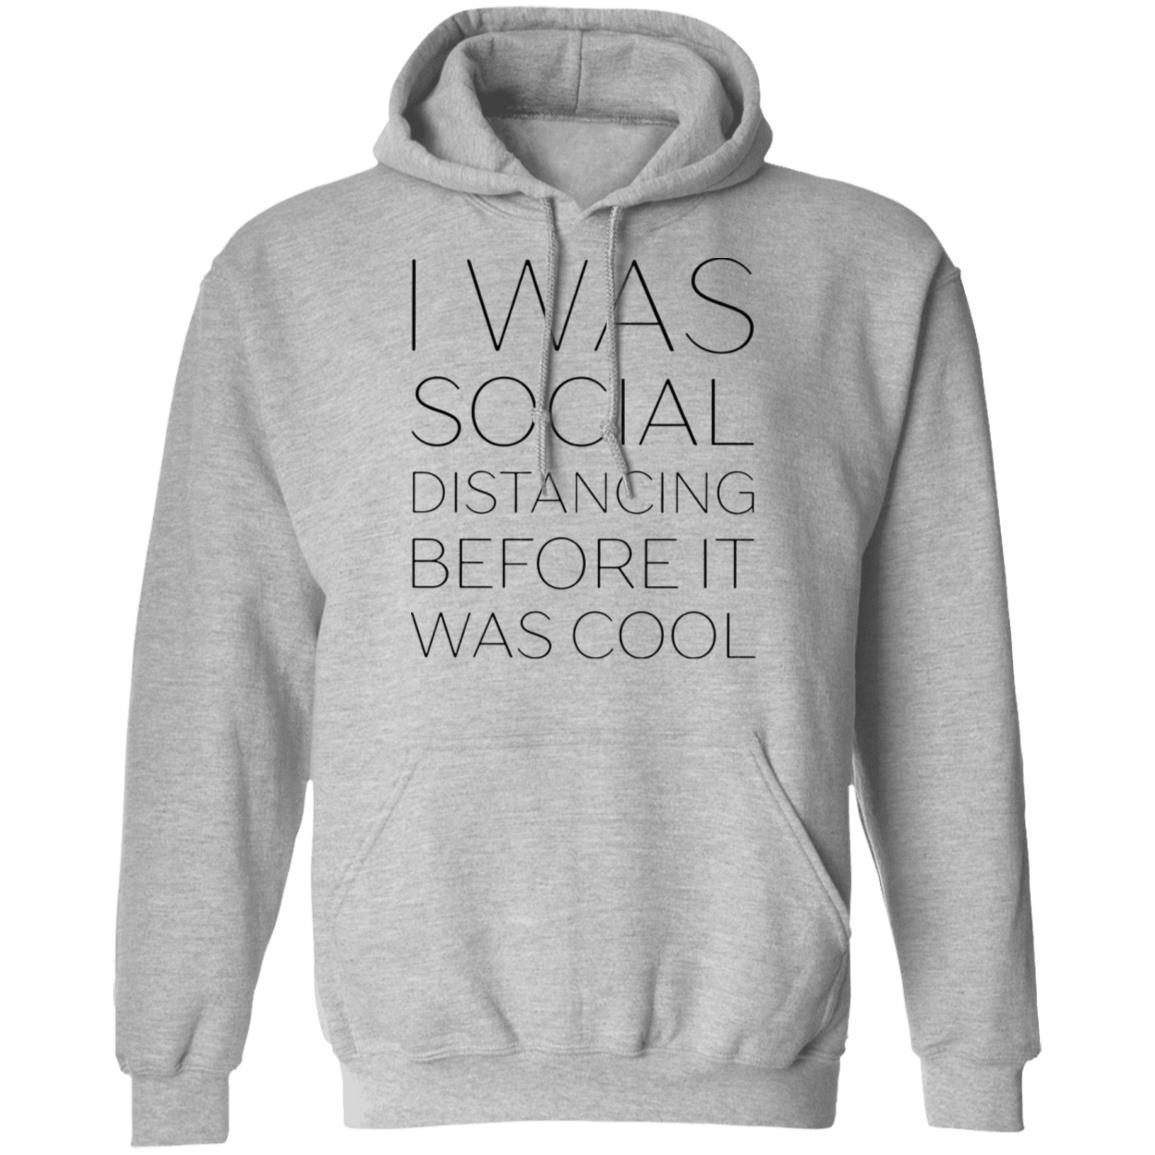 I Was Social Distancing Before It Was Cool shirt 3